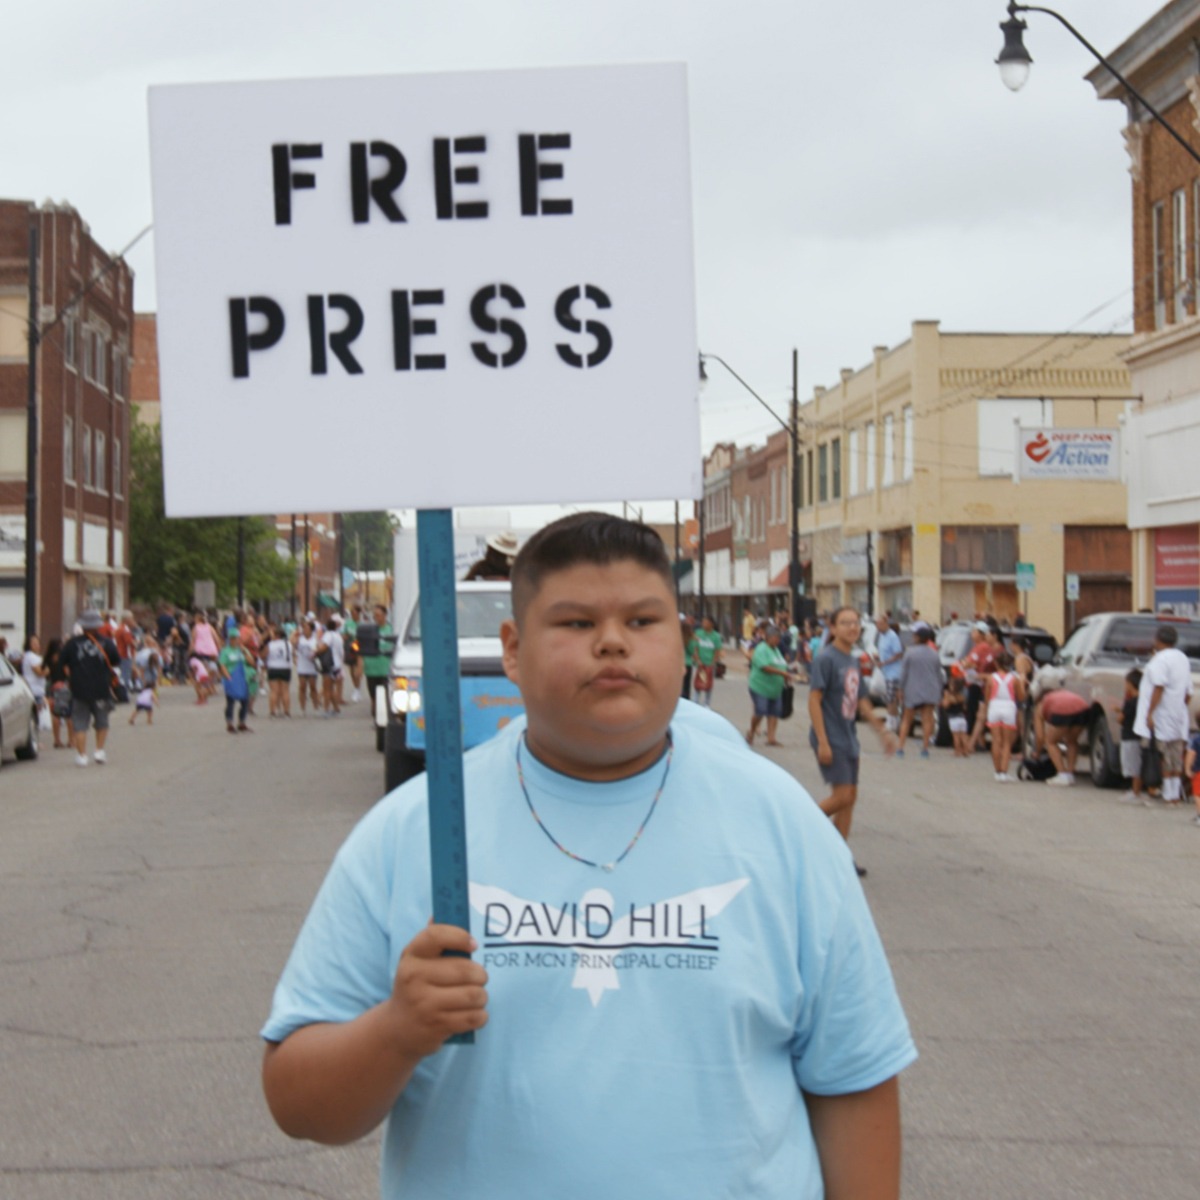 a young boy holding a sign that reads, "FREE PRESS" walking along a street.